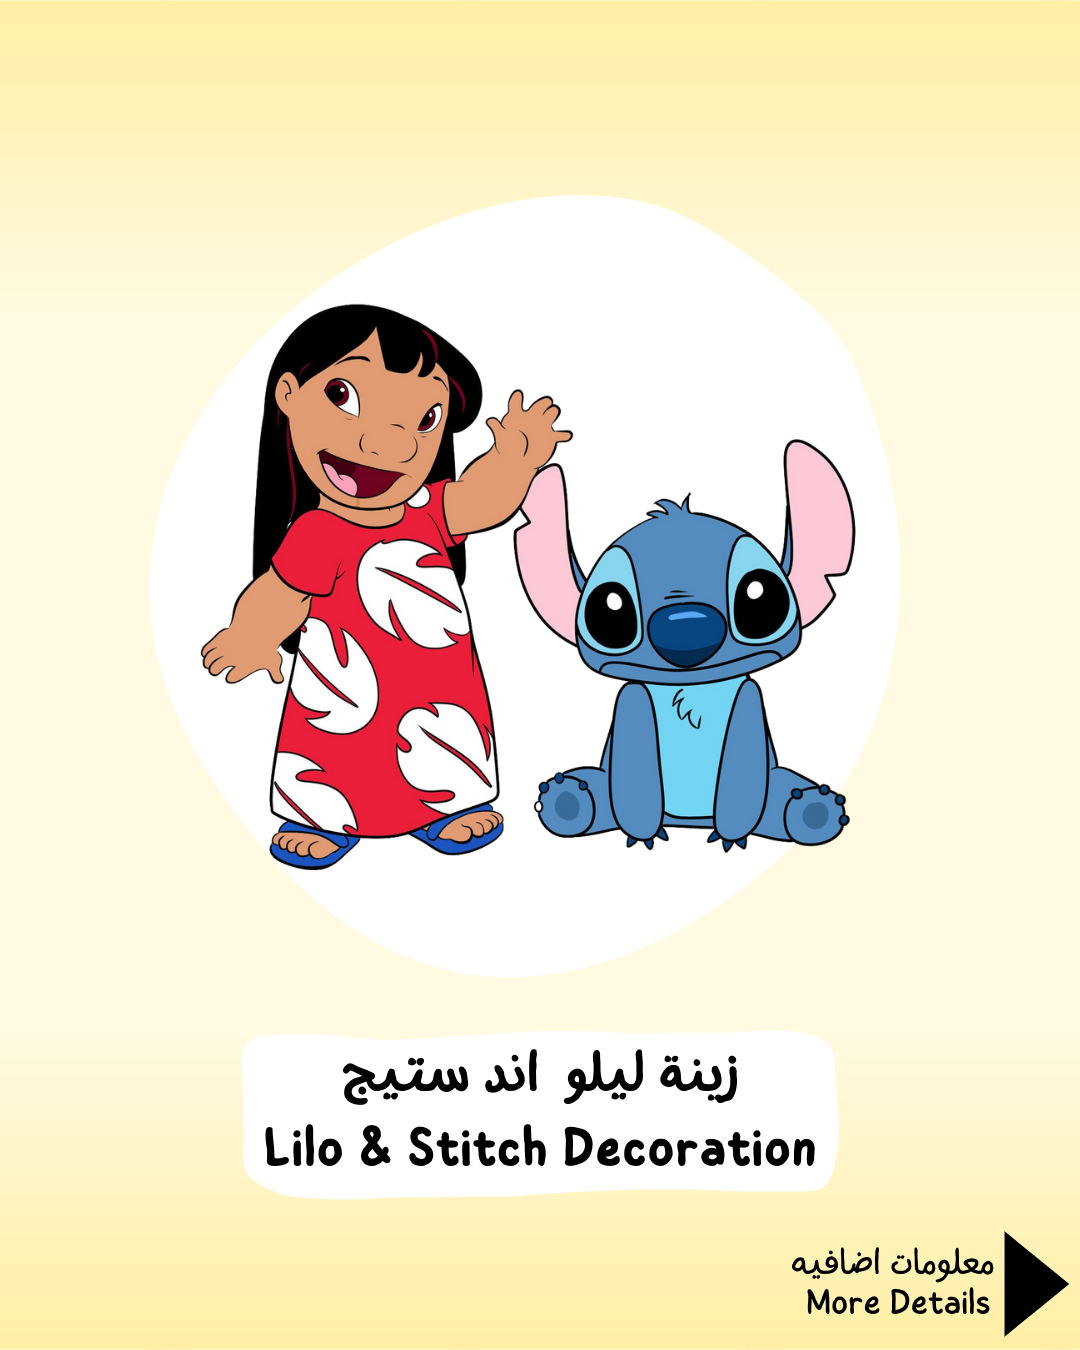 Stitch Birthday Decorations, Include Banner, Cake Topper, Balloons, Hanging  Swirls for Stitch Party Decorations price in Saudi Arabia,  Saudi  Arabia